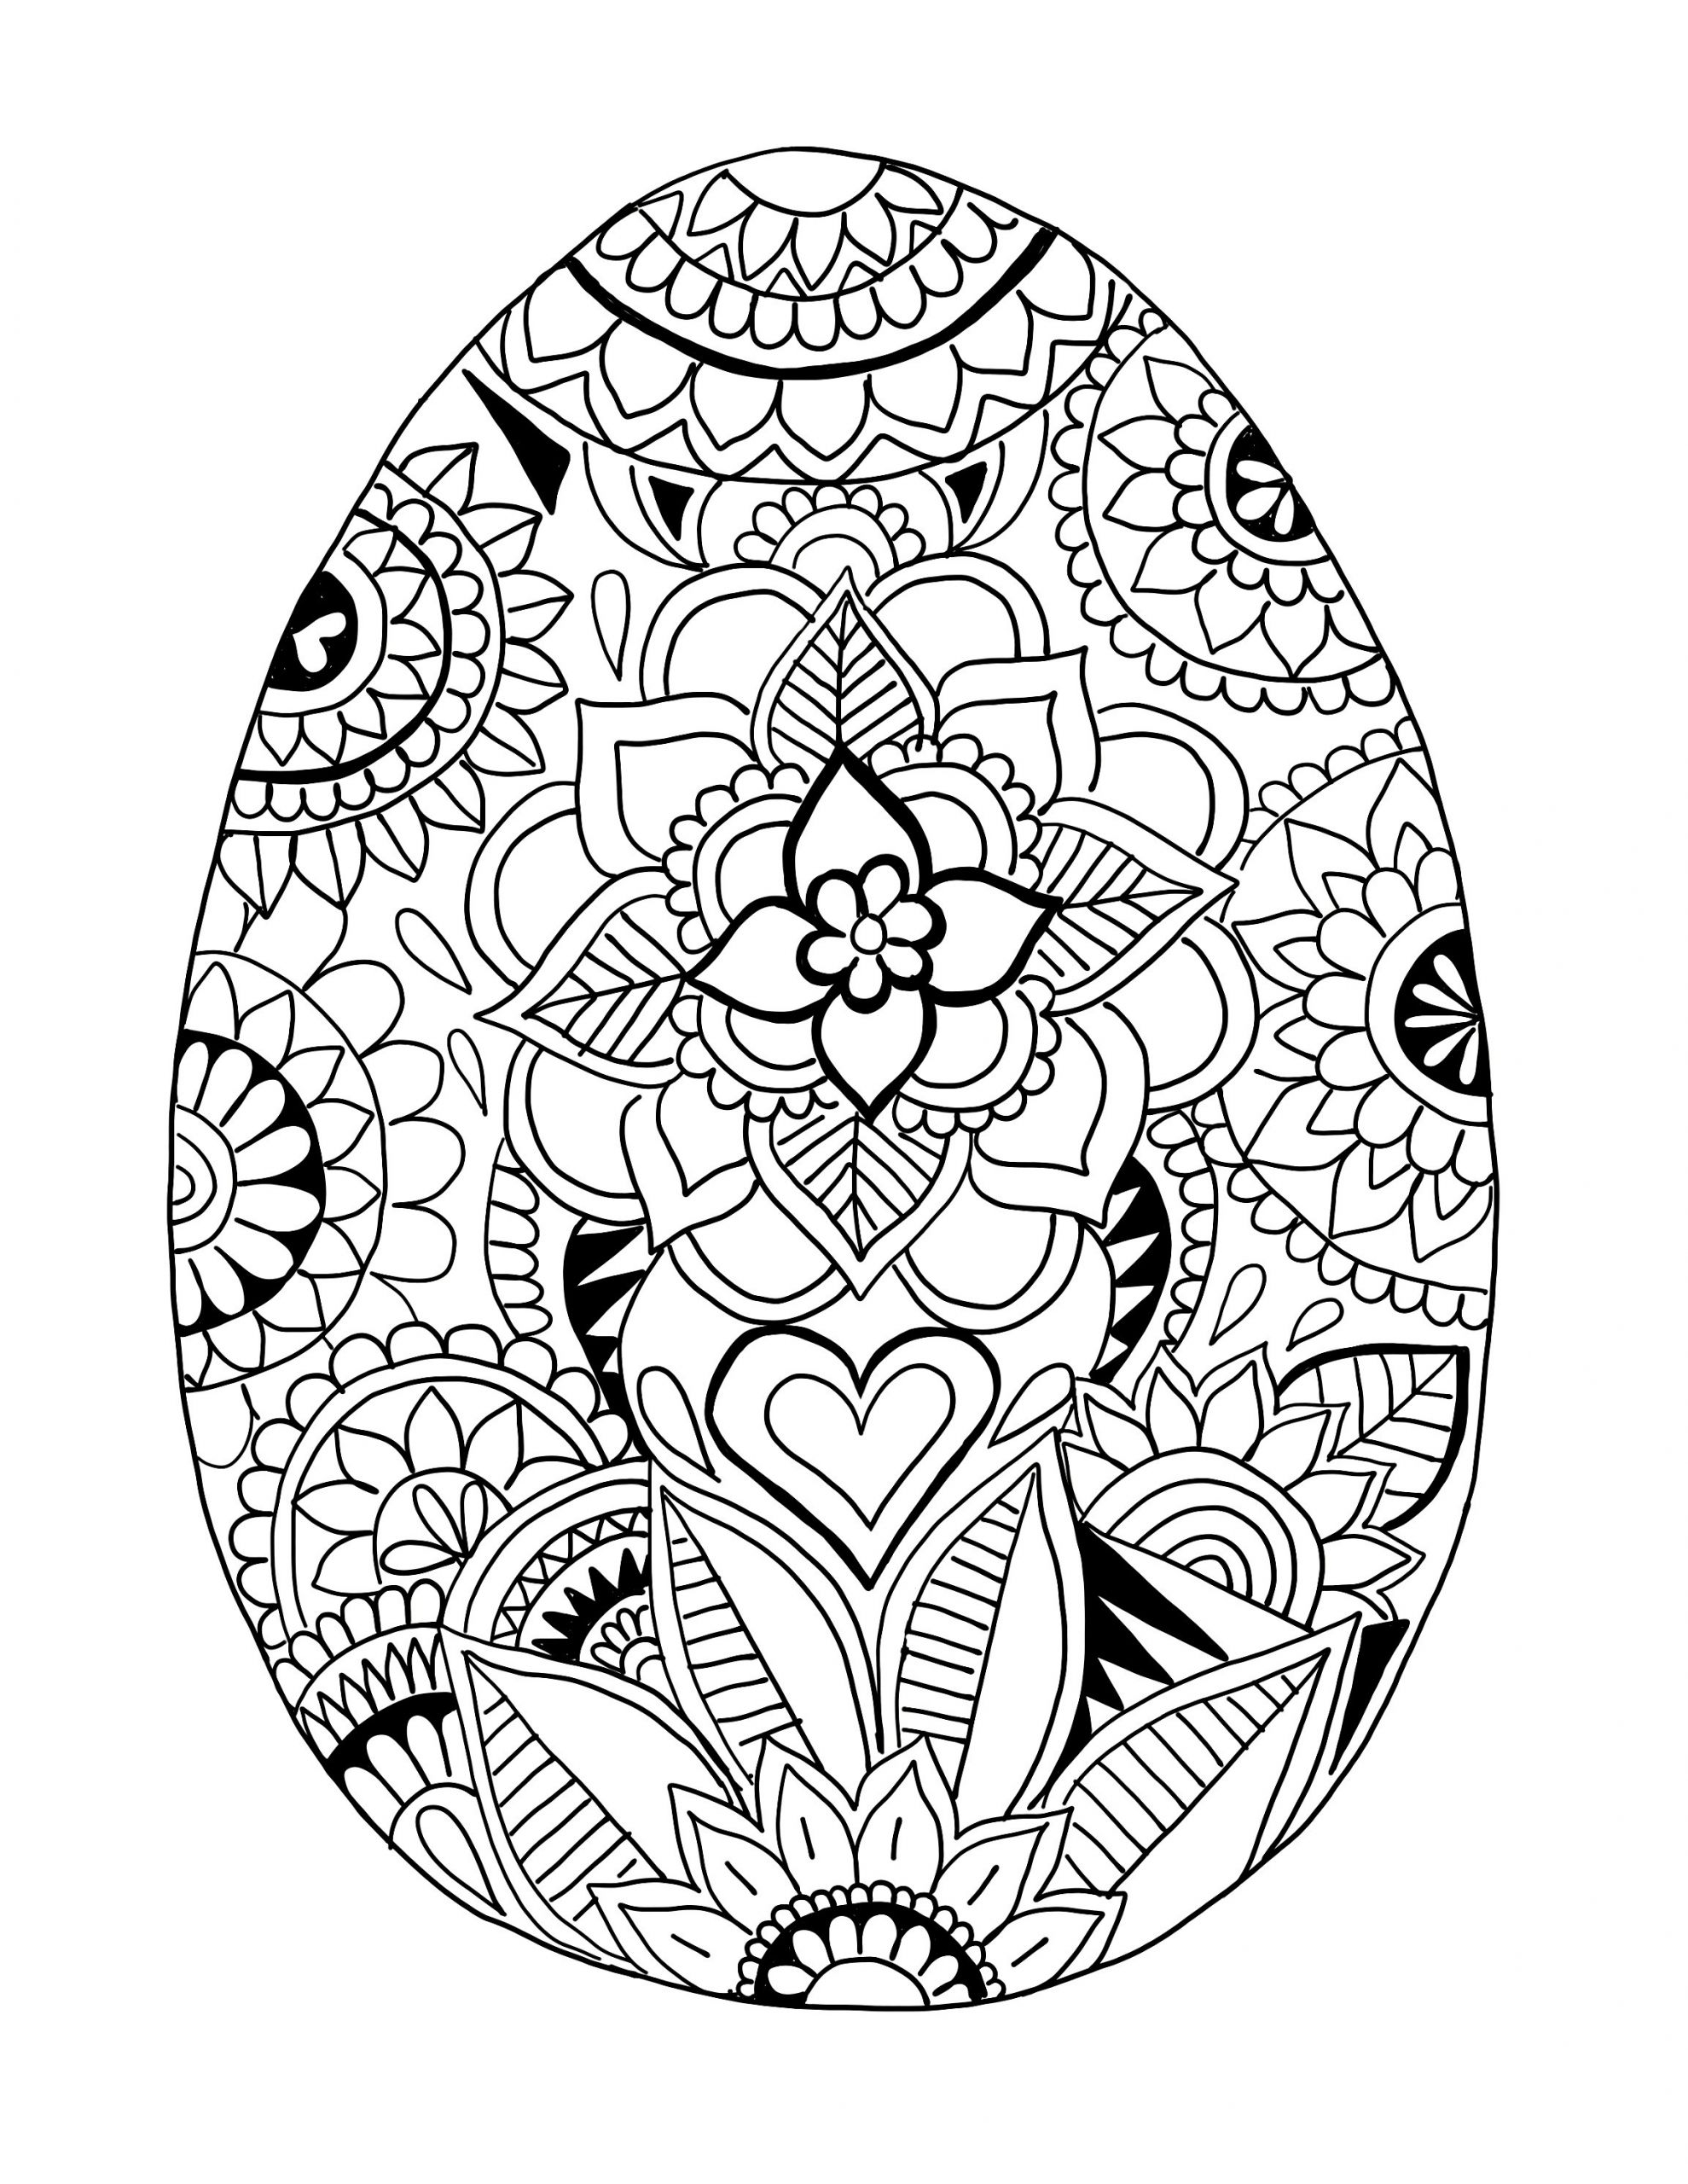 Printable Easter Egg Coloring Pages
 Easter Egg Printable Coloring Page